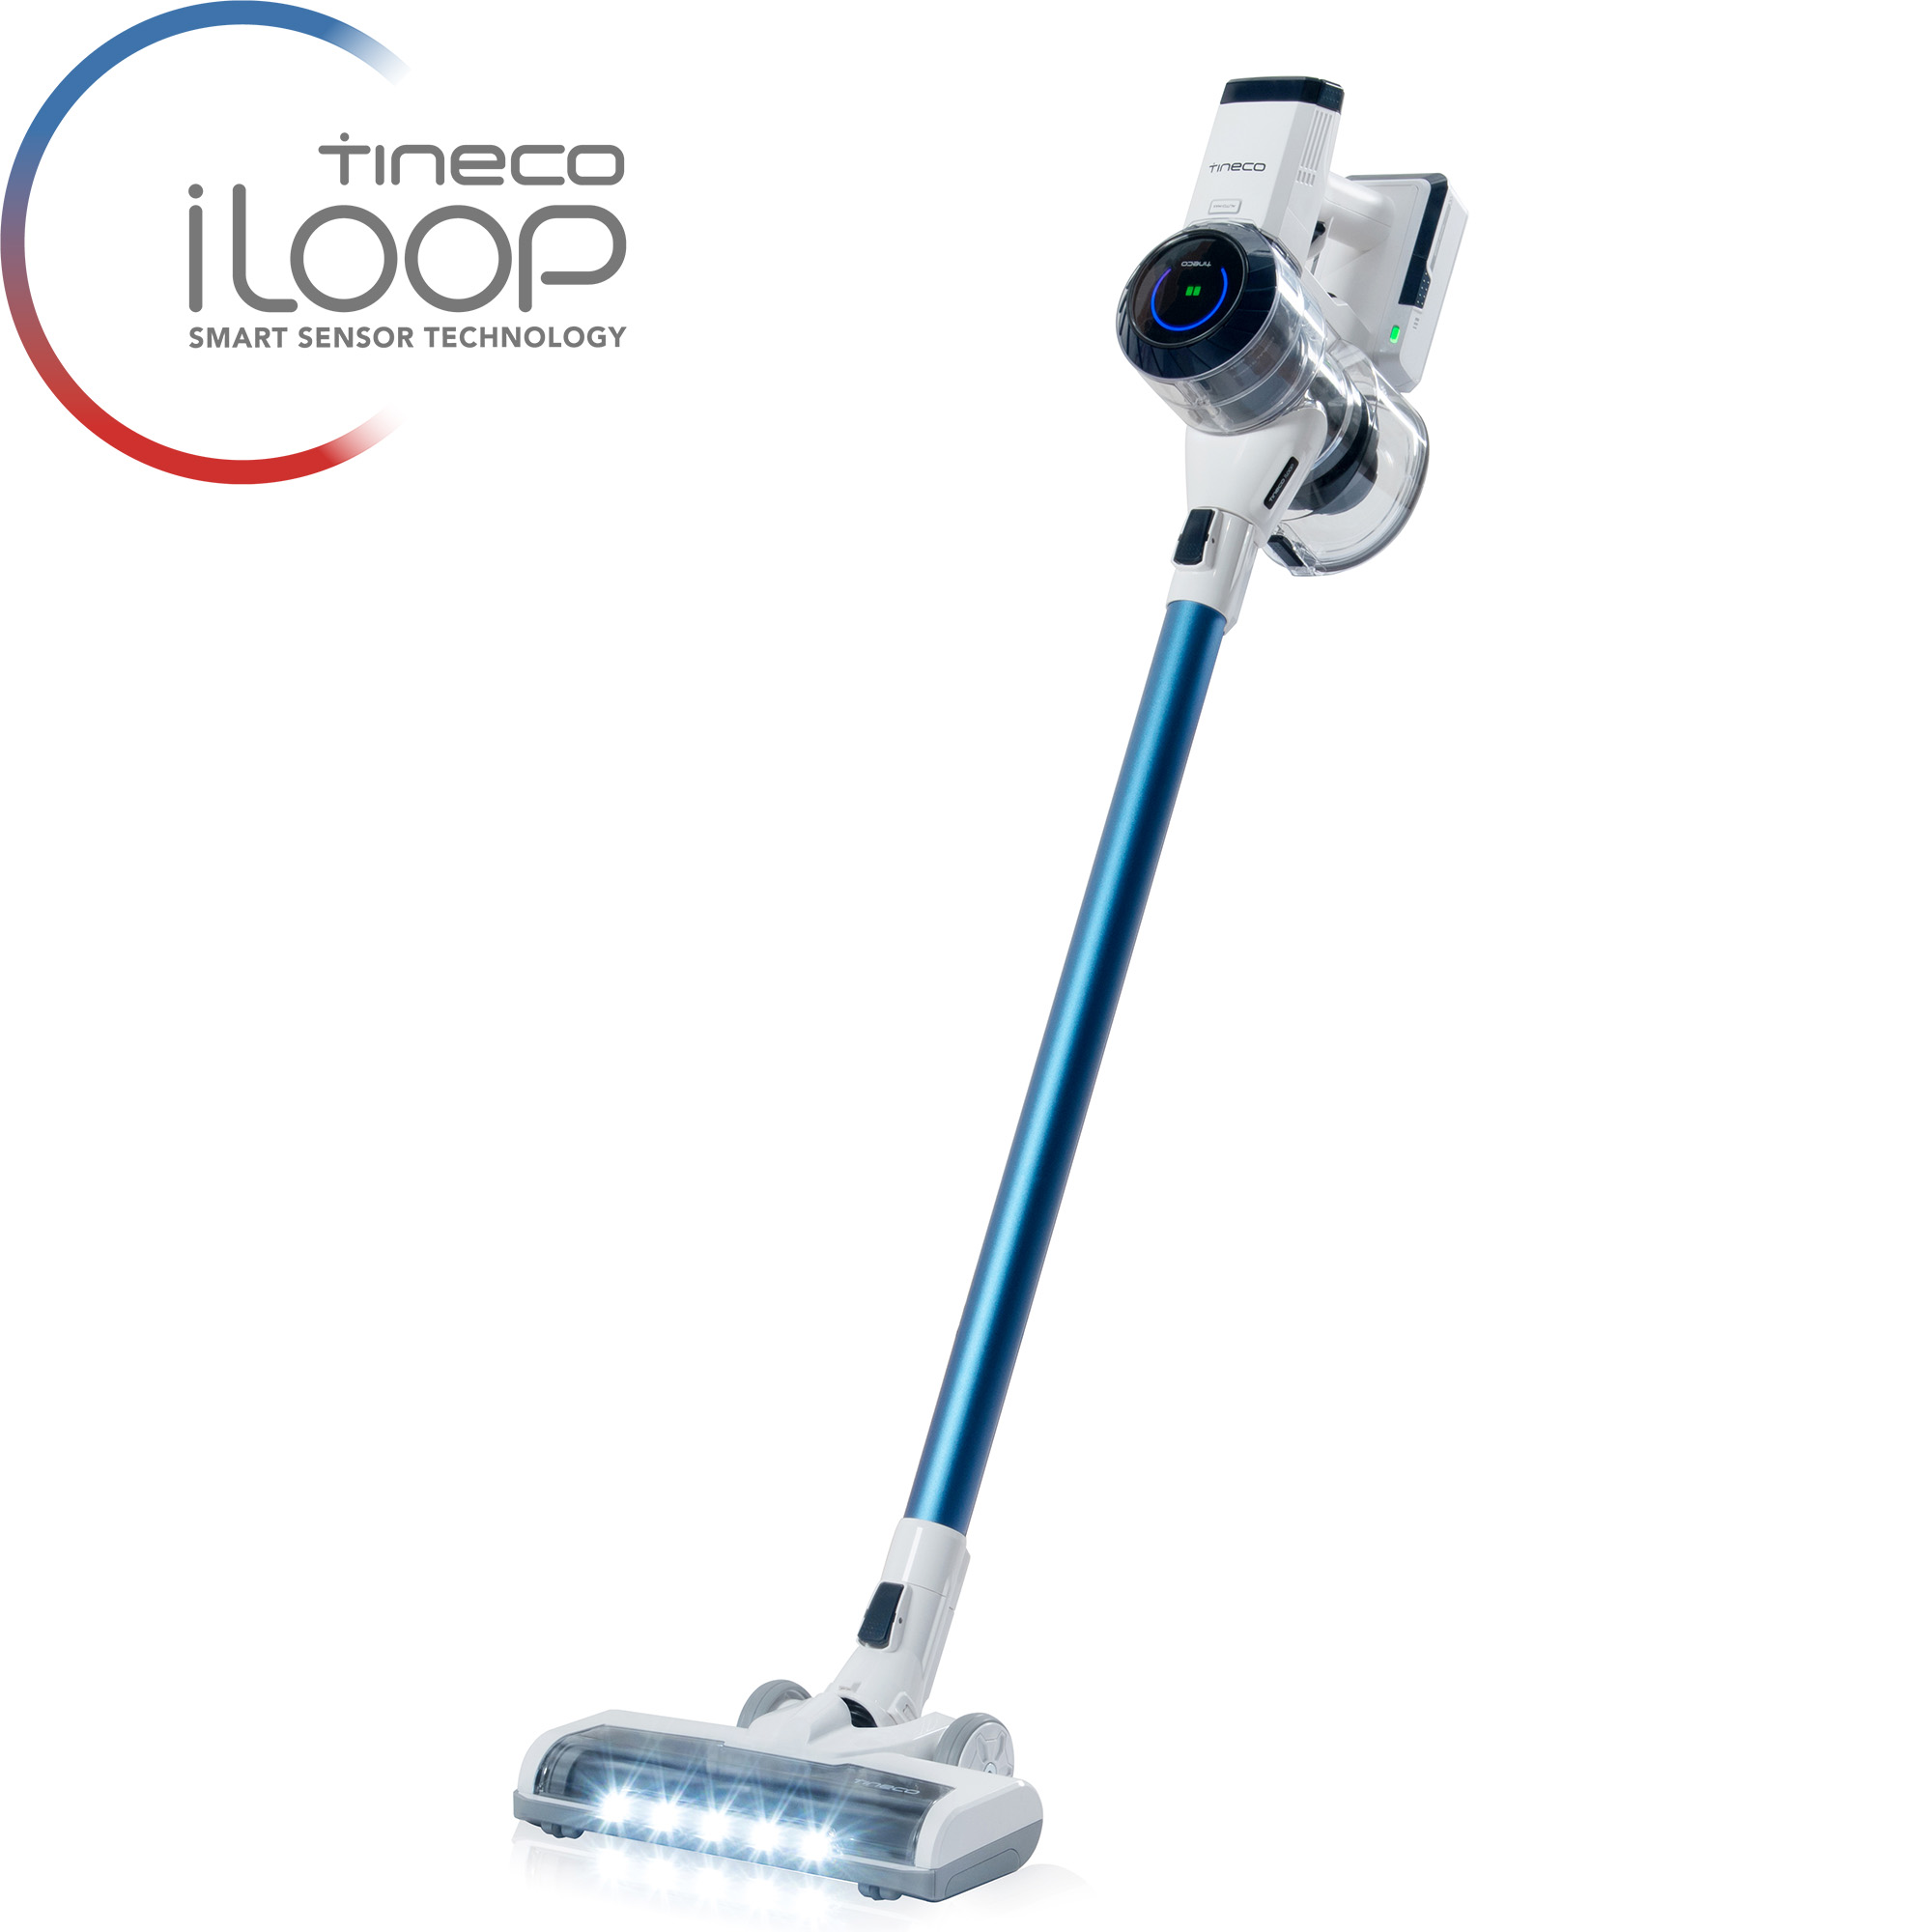 Tineco S10 Cordless Smart Stick Vacuum Cleaner for Hard Floors and Carpet - image 1 of 10